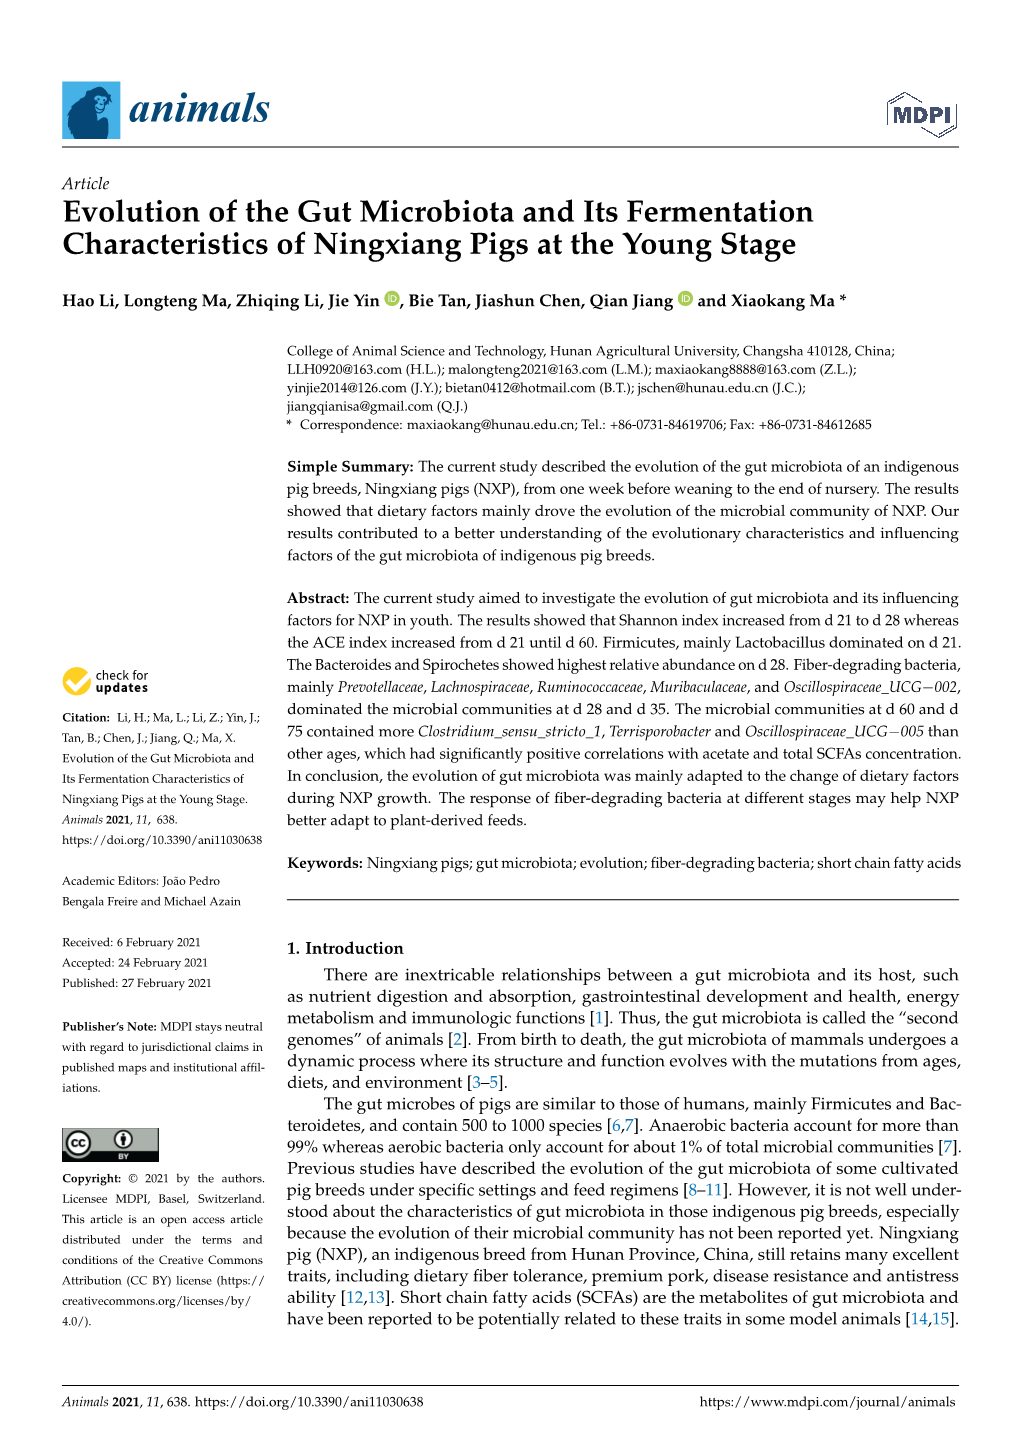 Evolution of the Gut Microbiota and Its Fermentation Characteristics of Ningxiang Pigs at the Young Stage